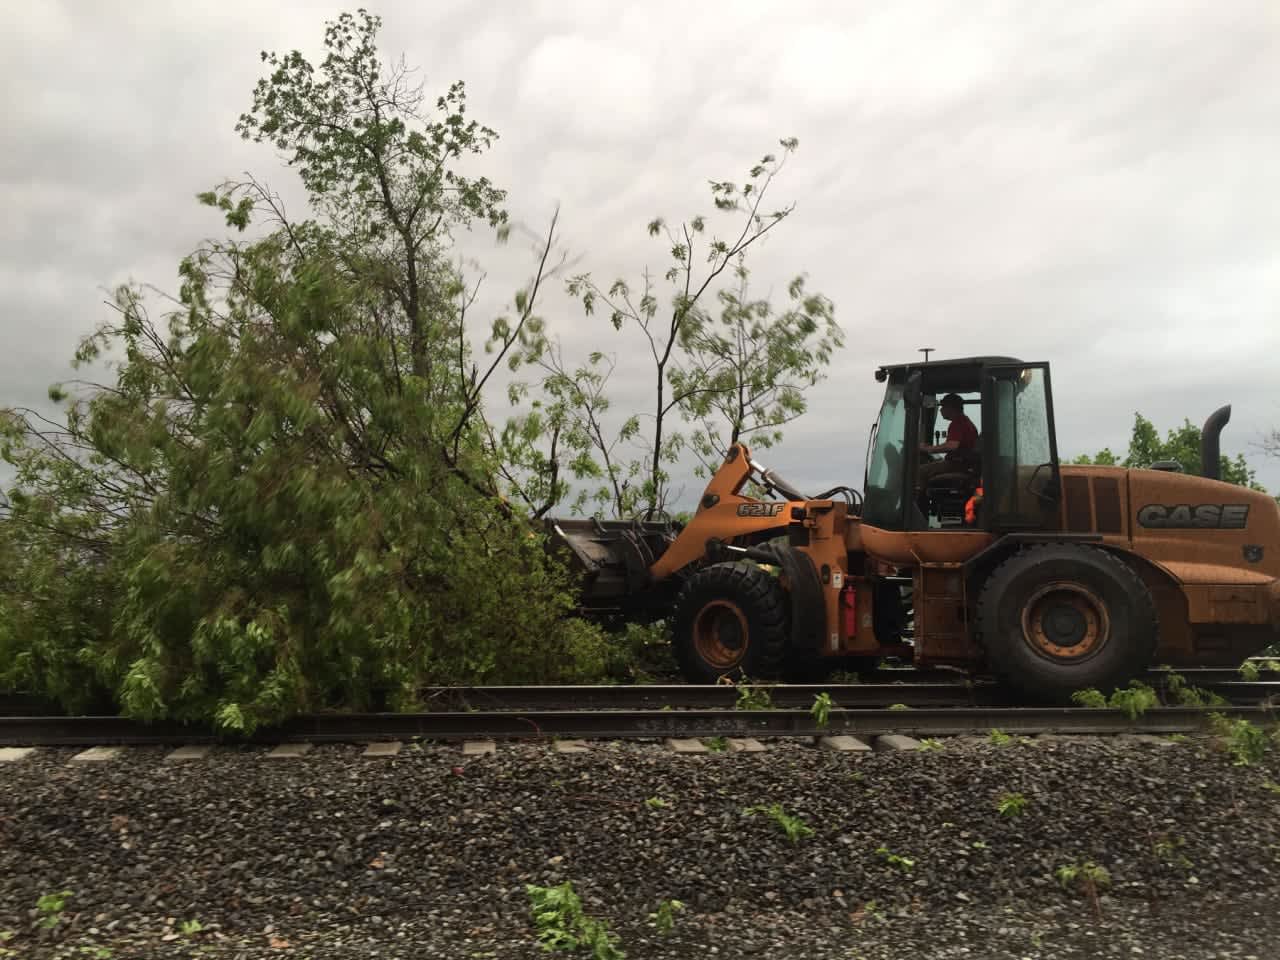 Metro-North crews worked overnight to remove more than 100 trees from tracks.